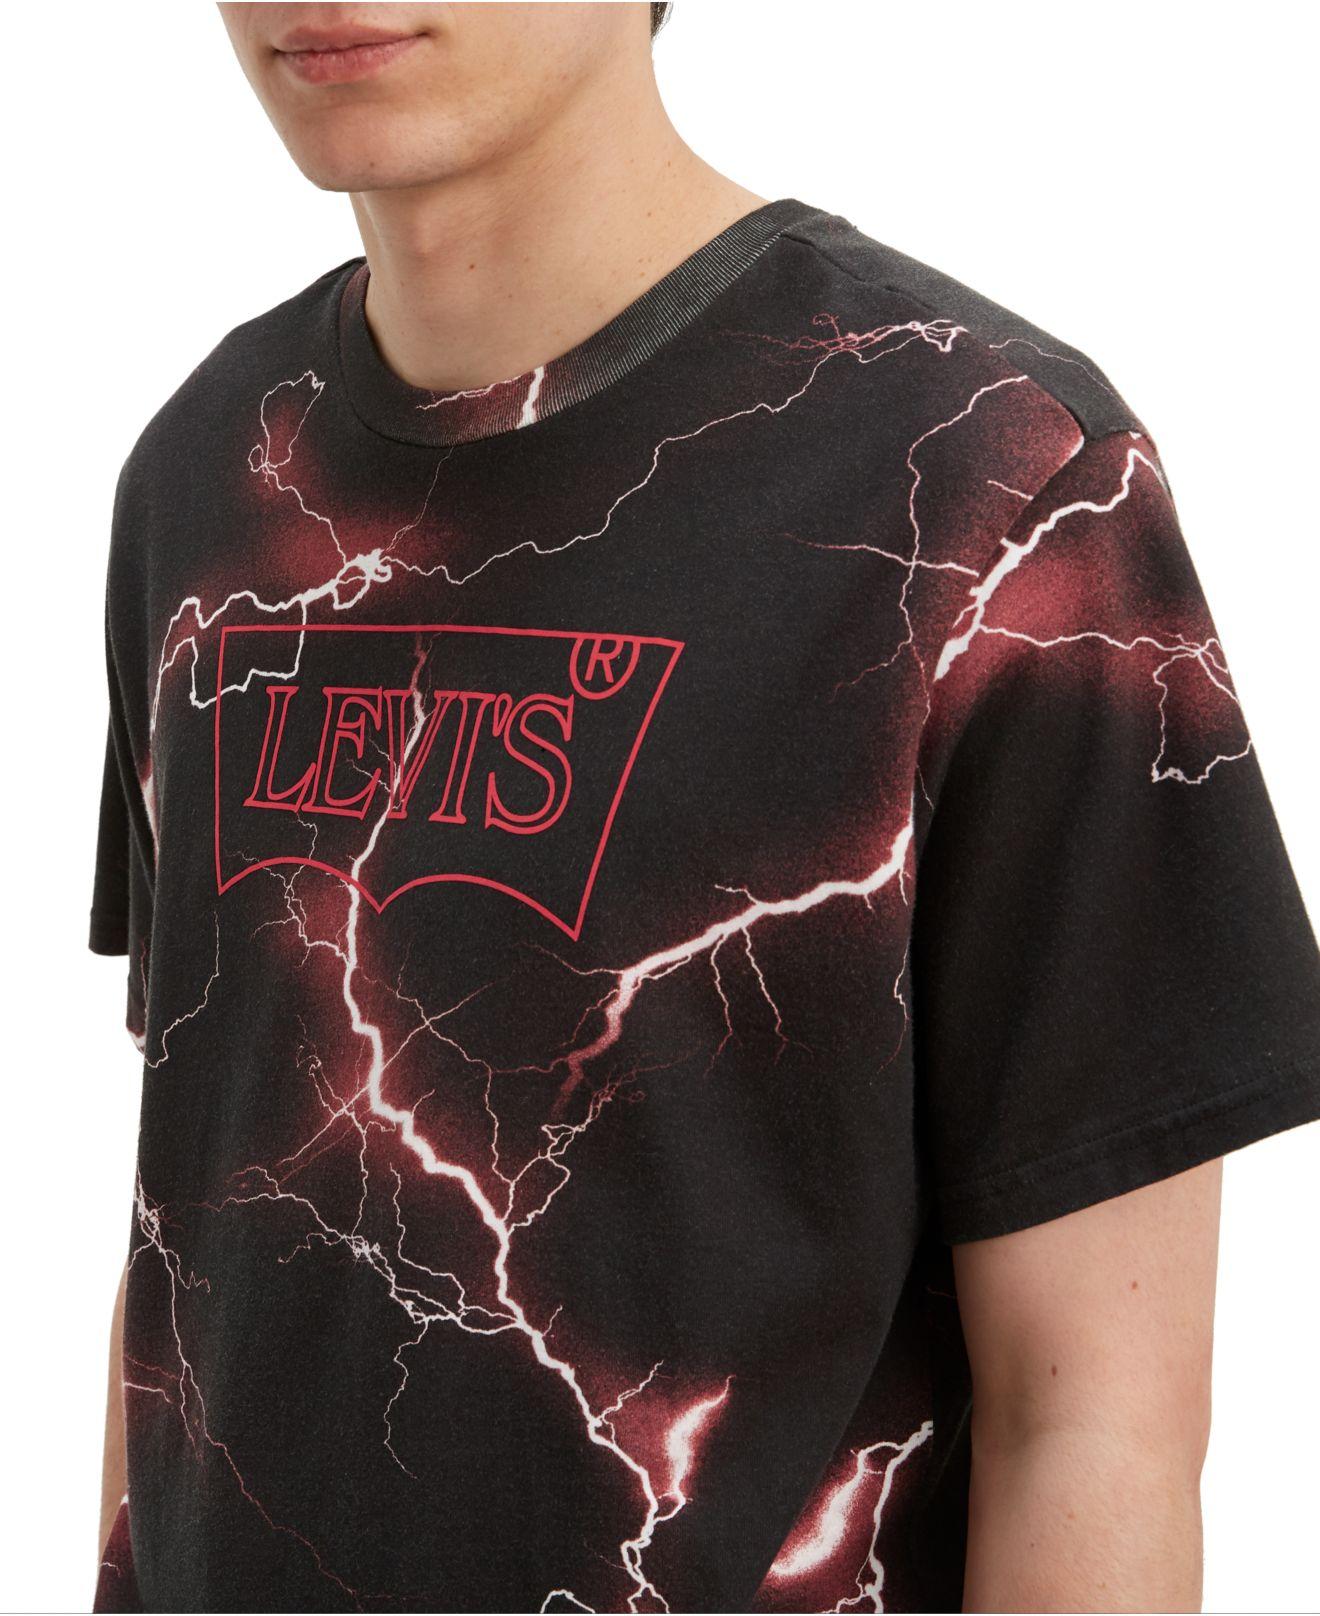 Levis Stranger Things Tee Online, SAVE 60%.